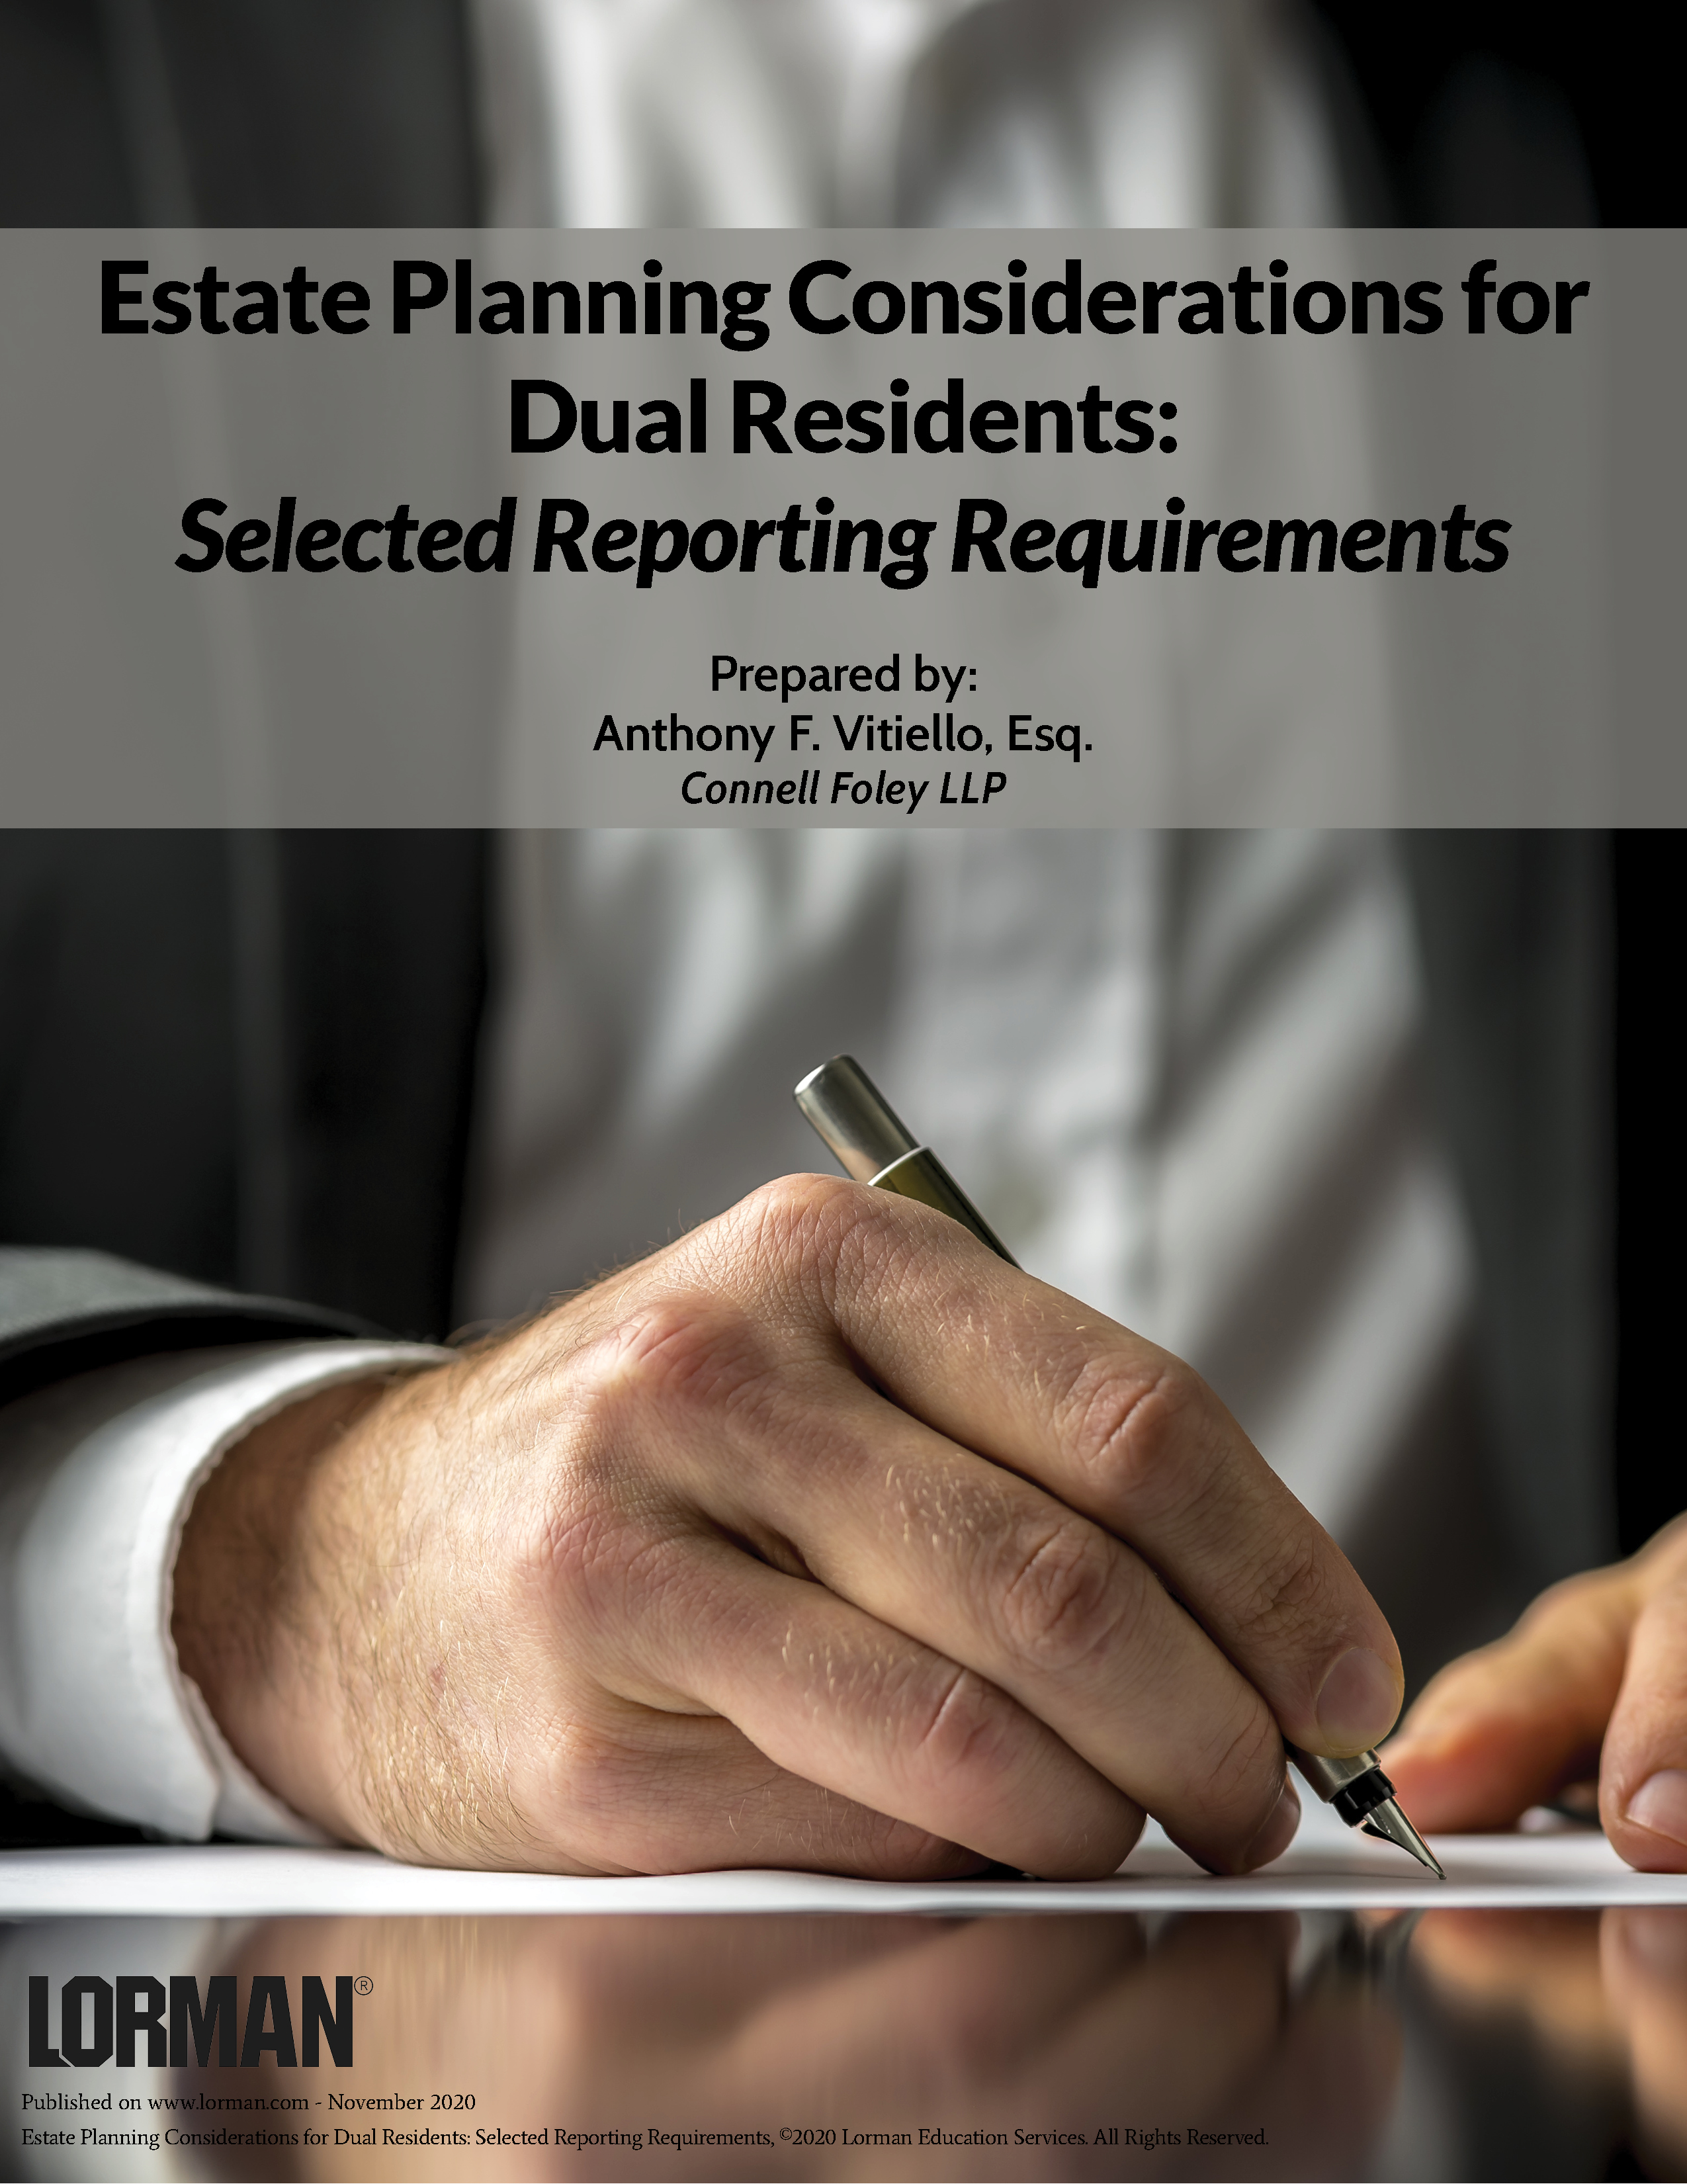 Estate Planning Considerations for Dual Residents: Selected Reporting Requirements